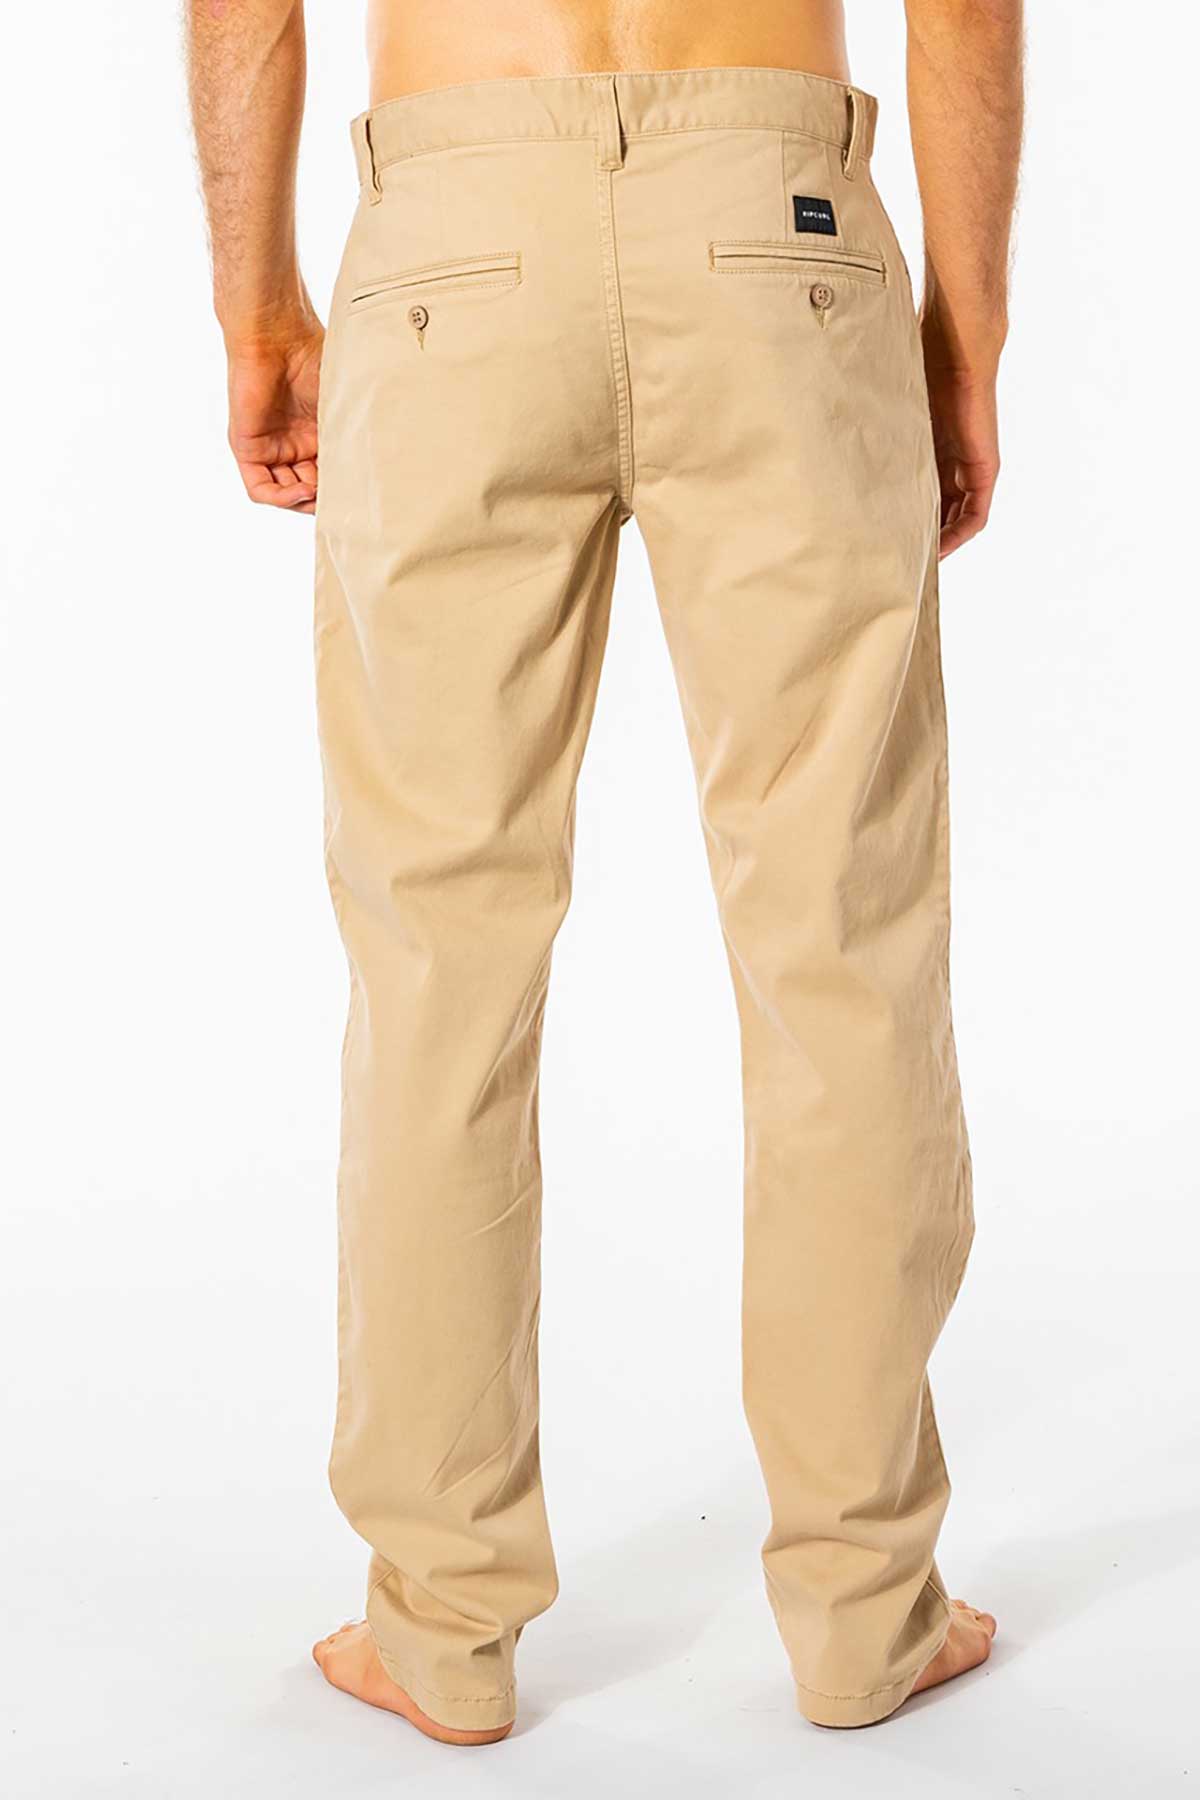 Rip Curl Mens Pant Re Entry Chino in khaki back view